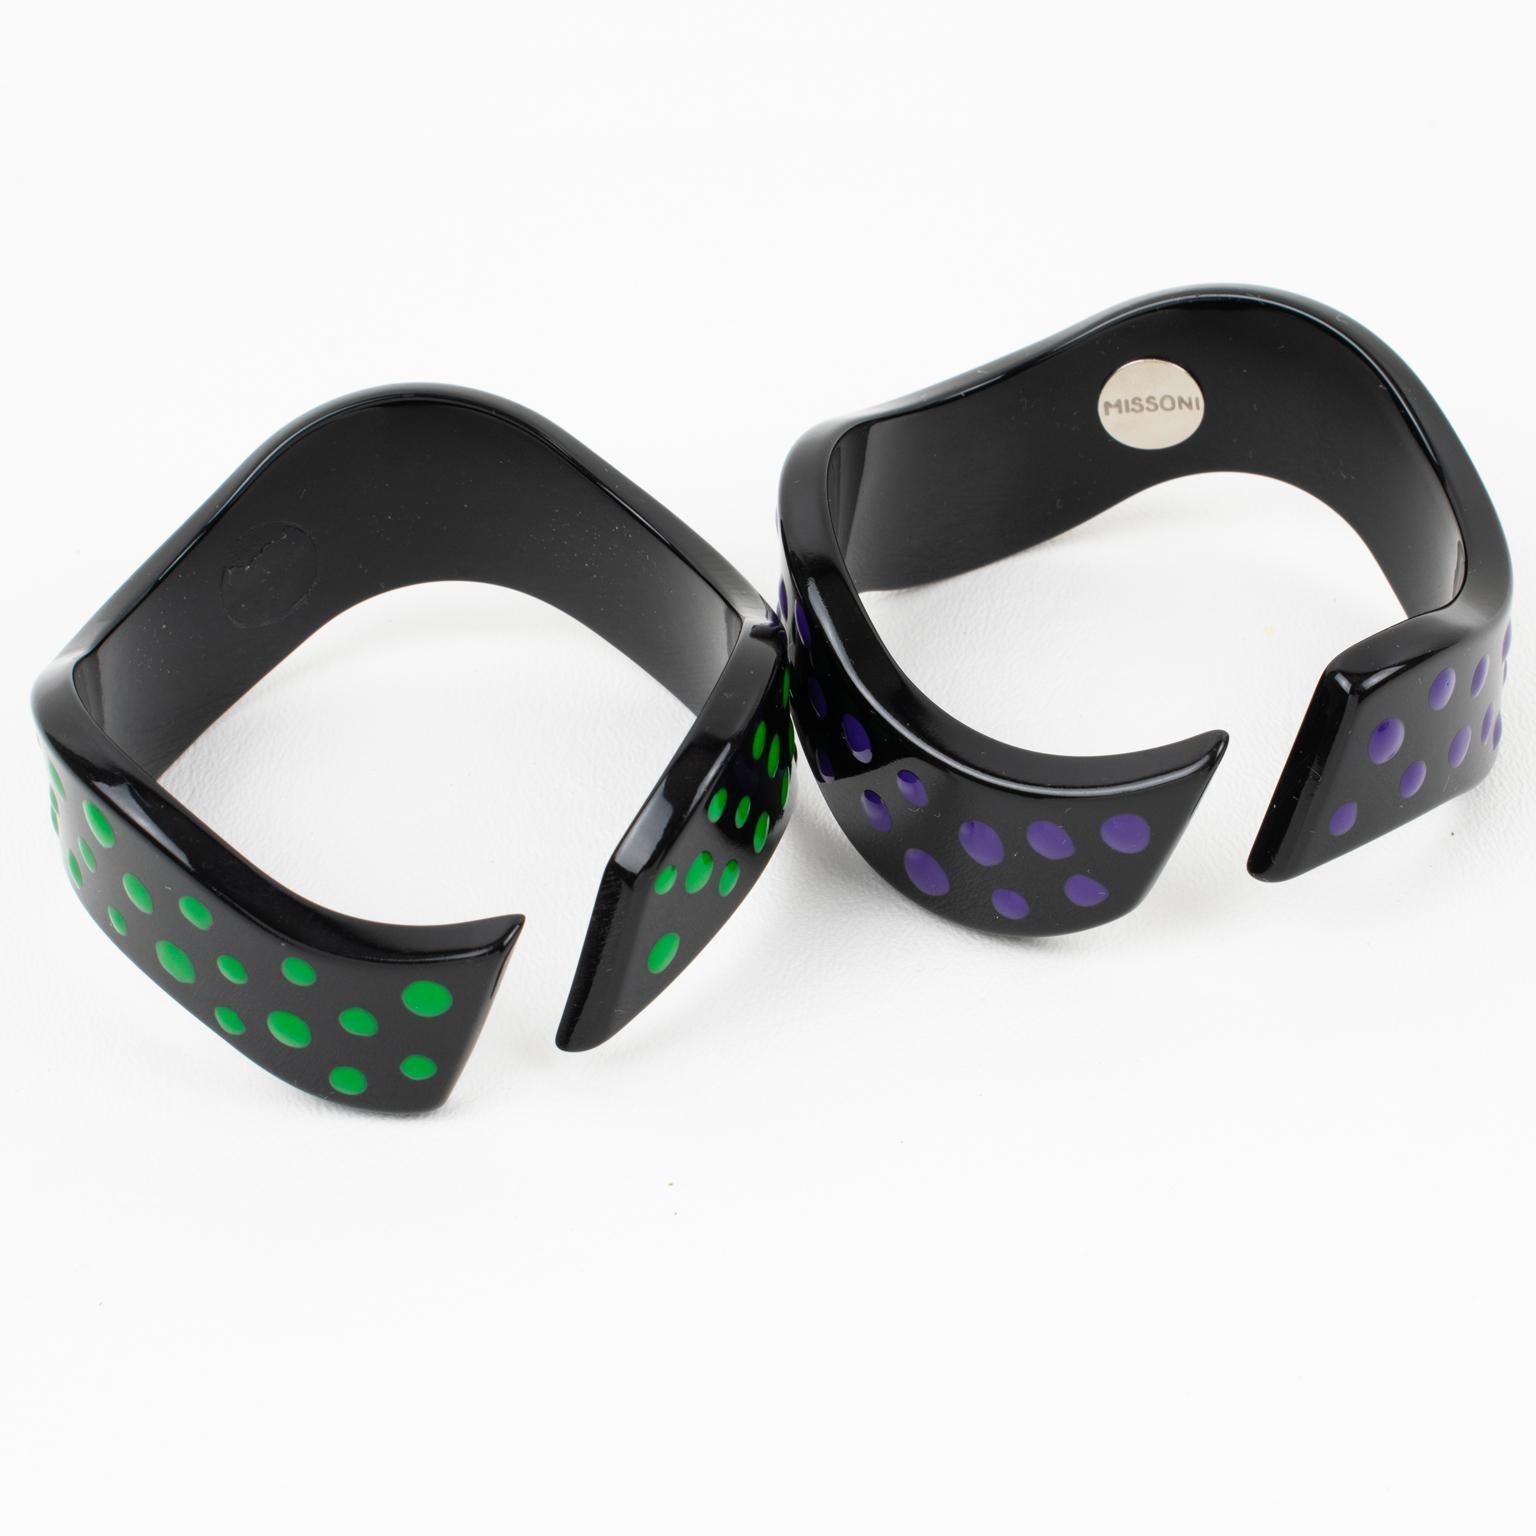 Missoni Black Lucite Resin Bracelet Bangle Purple and Green Dots, a pair In Excellent Condition For Sale In Atlanta, GA